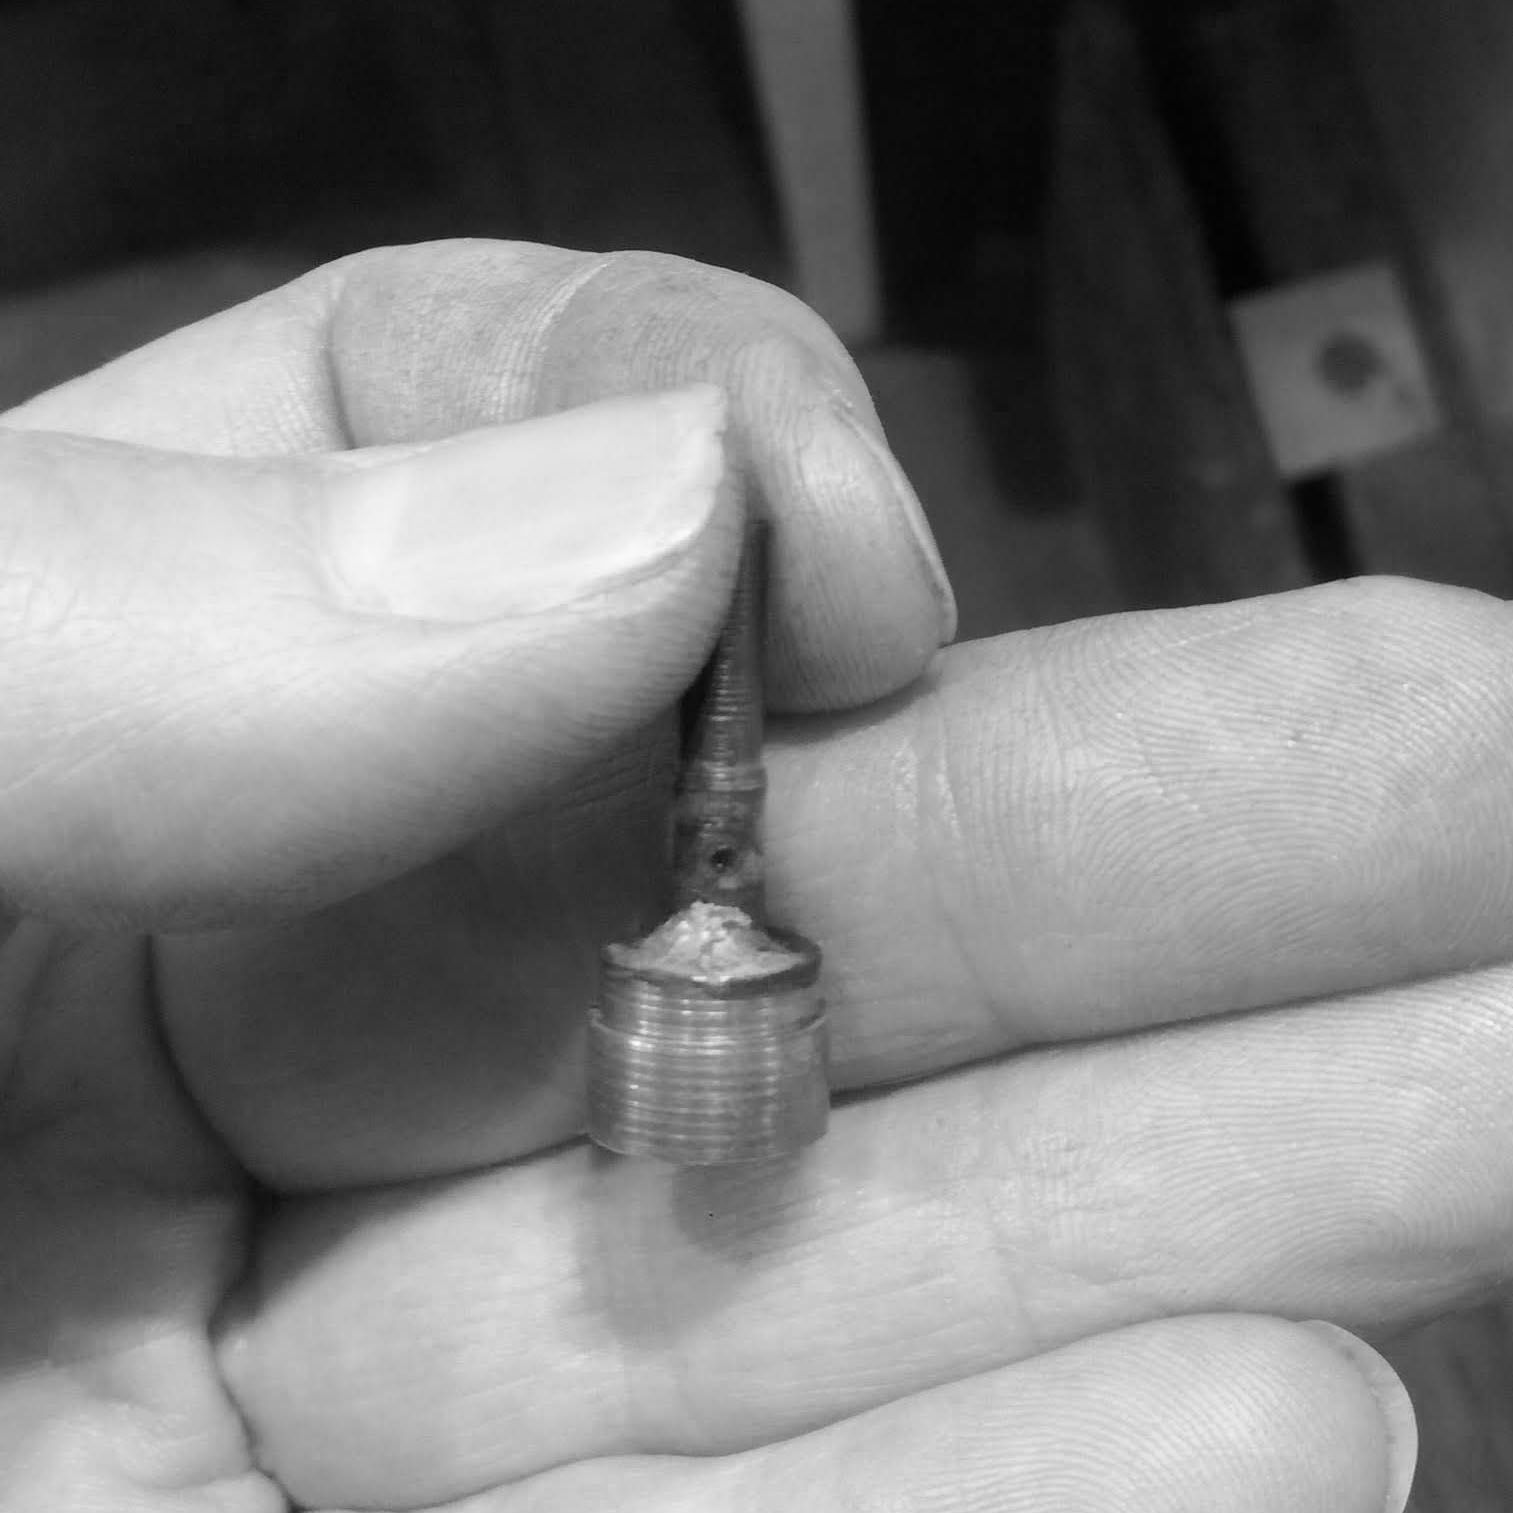 A generous amount of solder is used to make sure that the torque during turning does not break the crown off the stem.